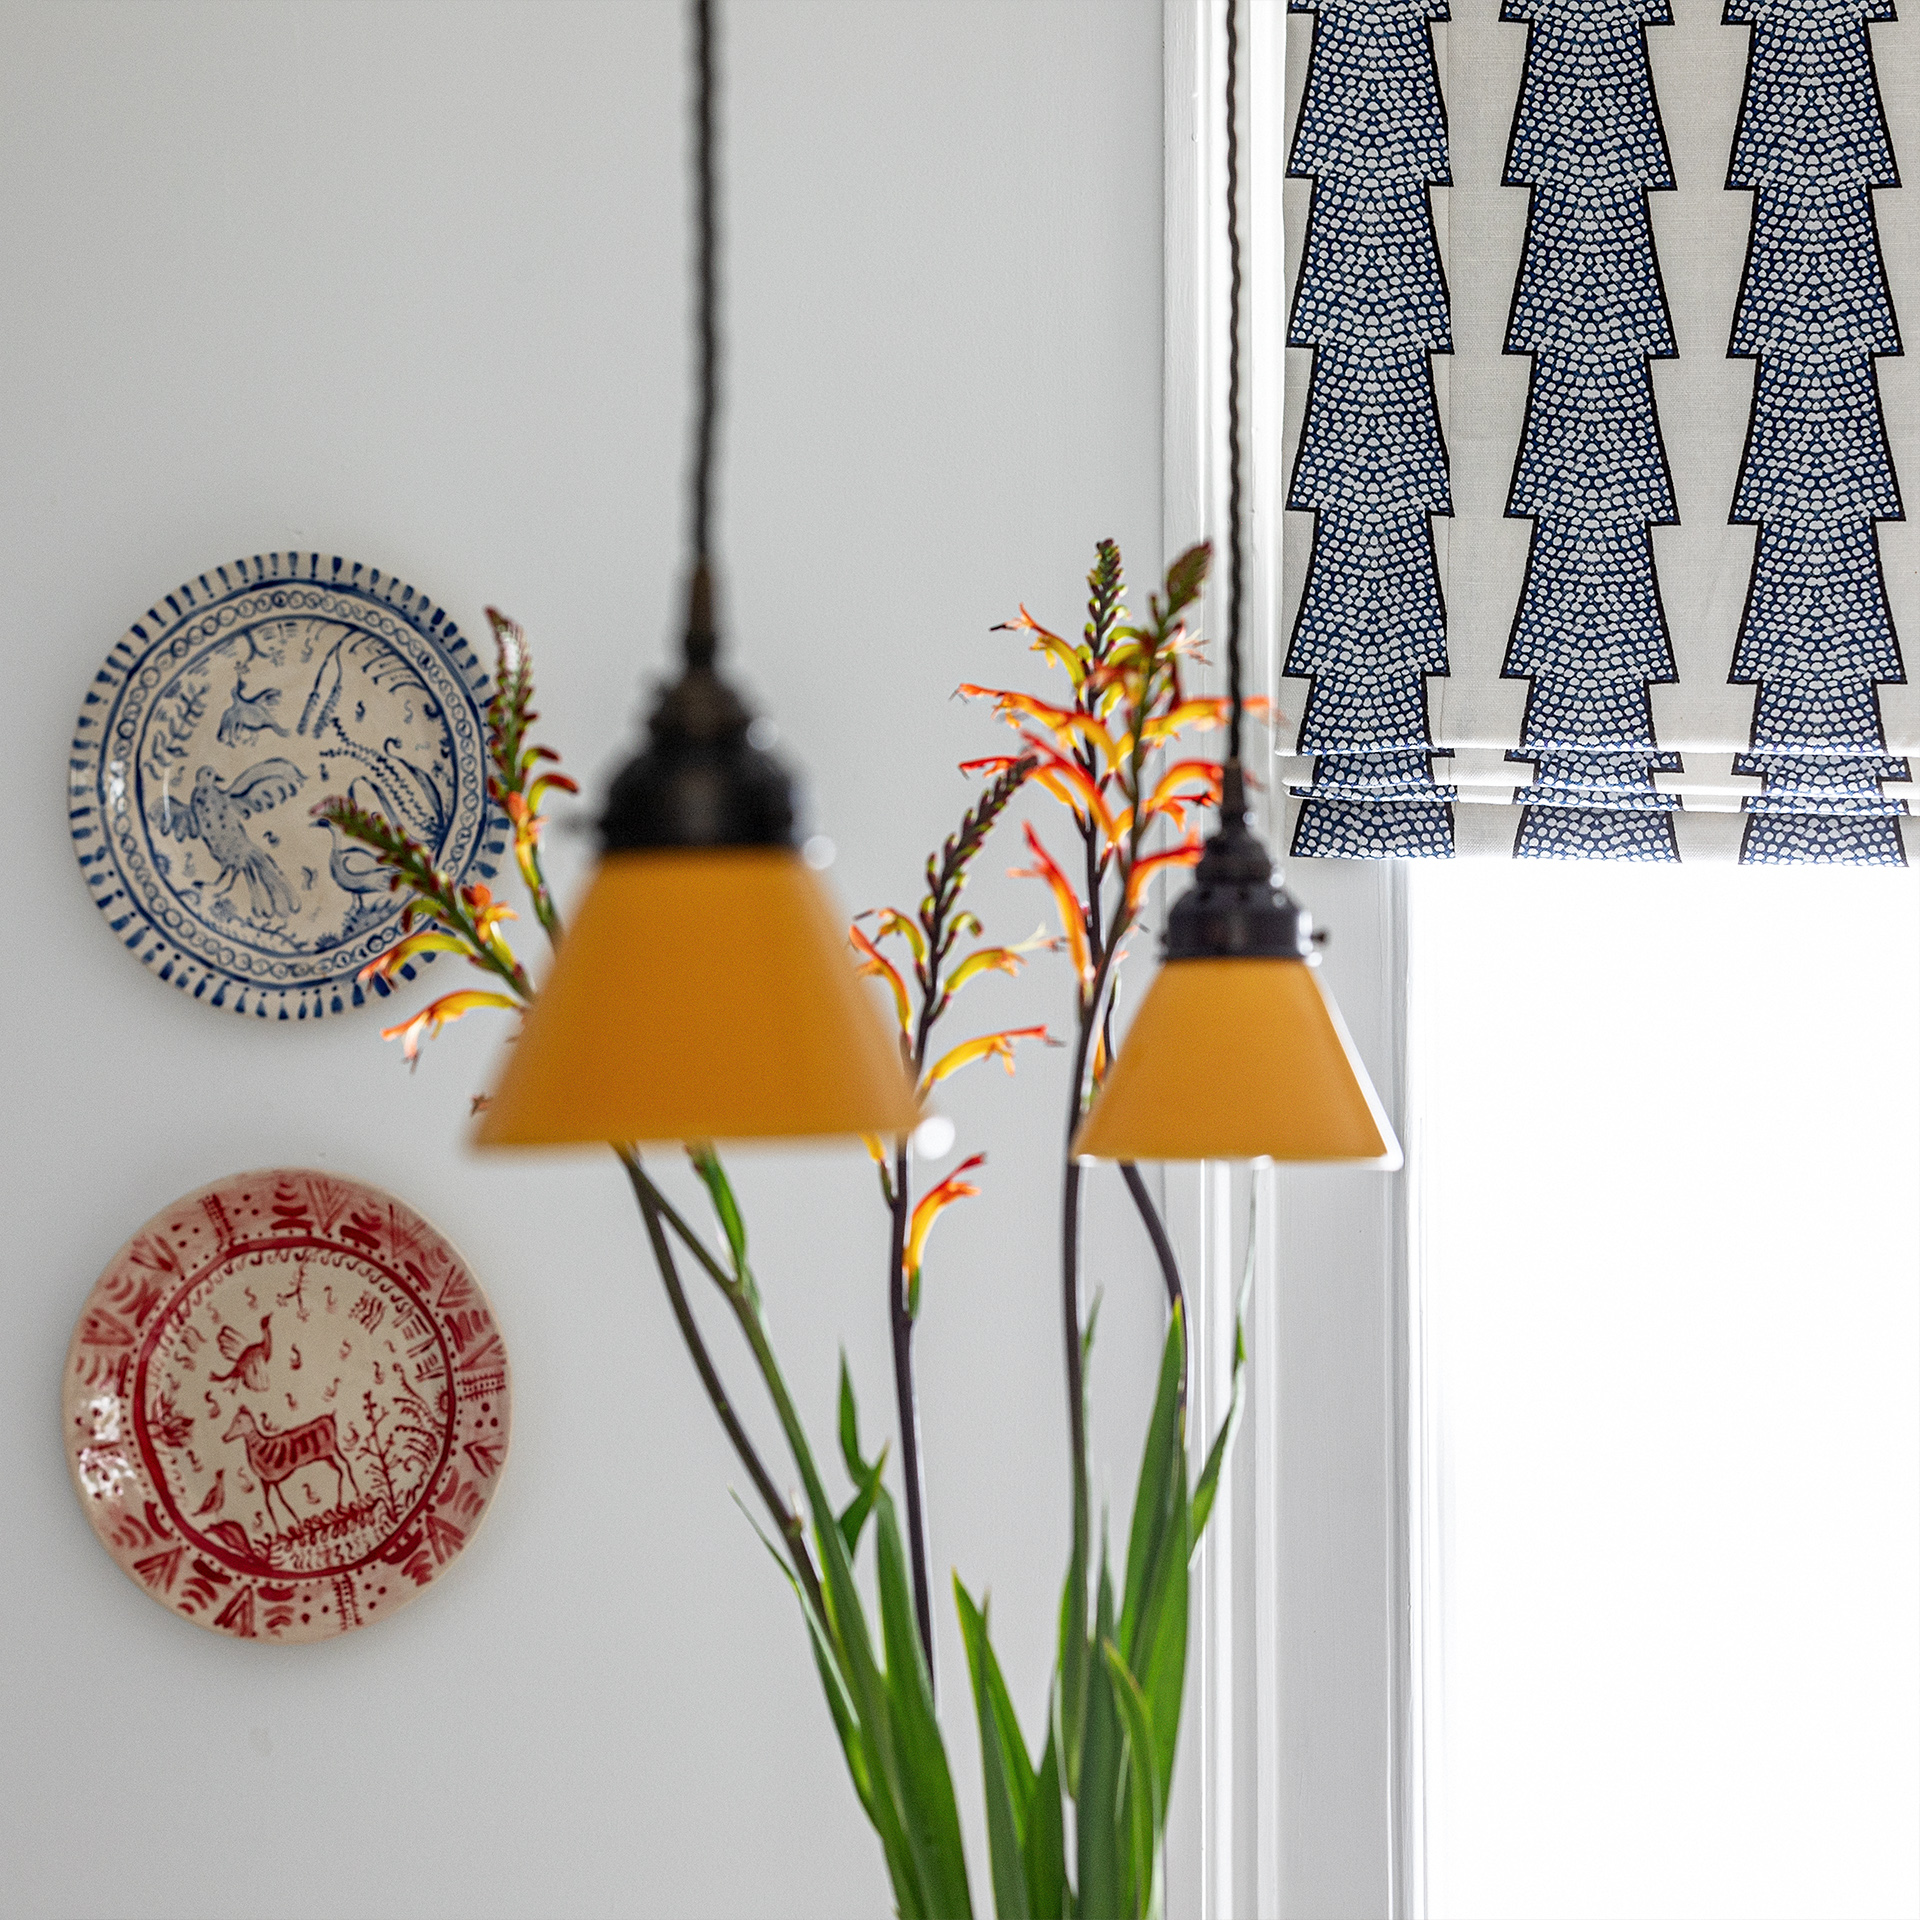 Ovington Street | Plates Hanging on the Wall | Angel O'Donnell